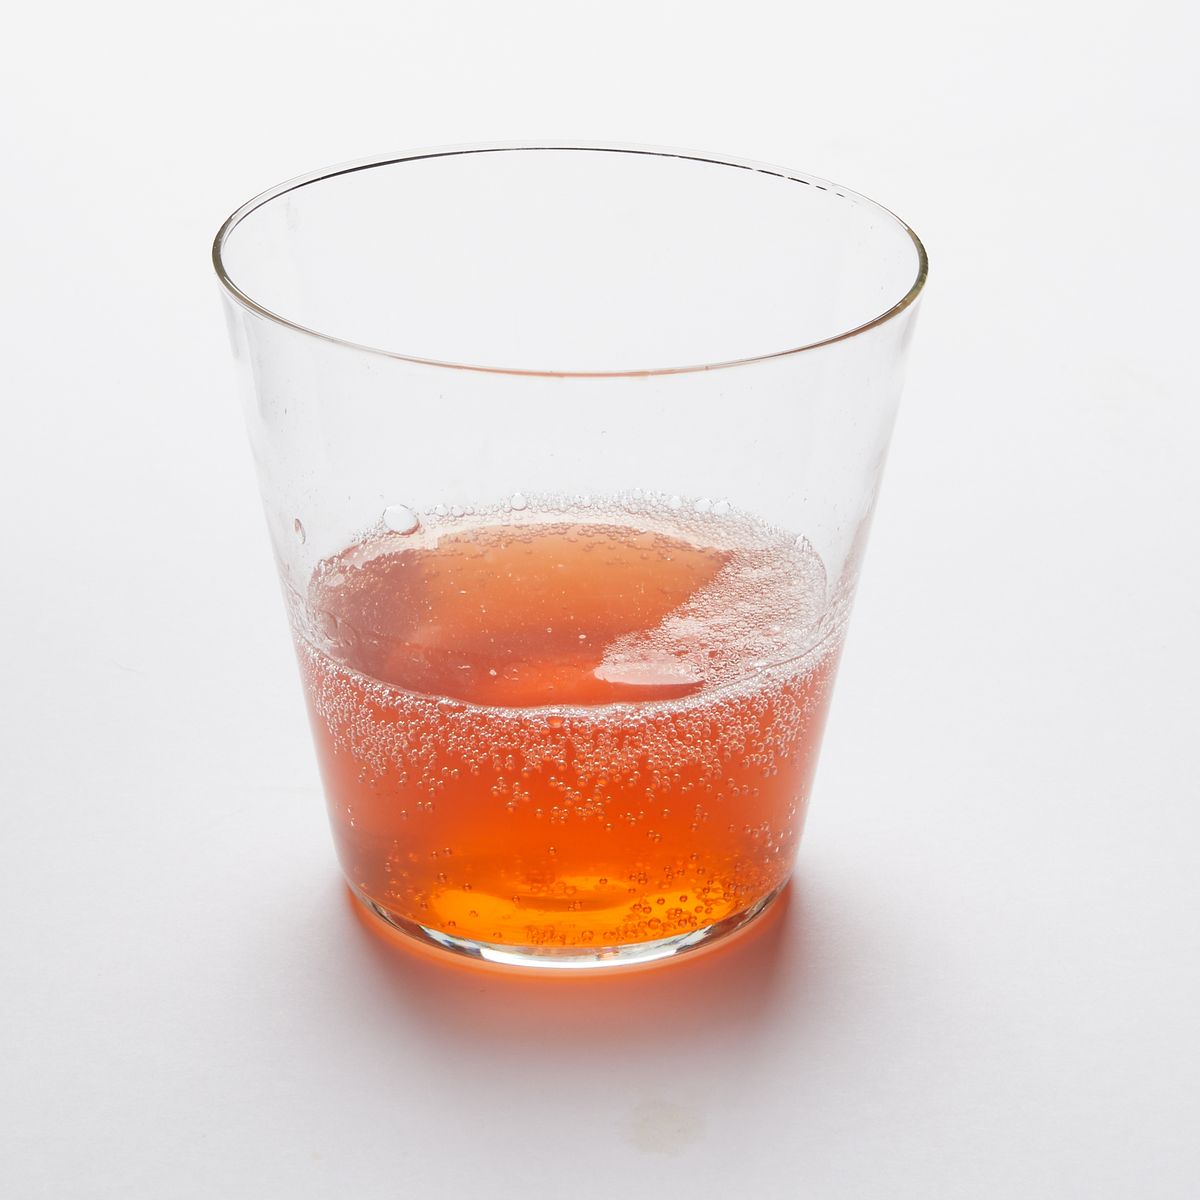 A short drinking glass made of clear glass, filled with amber drink